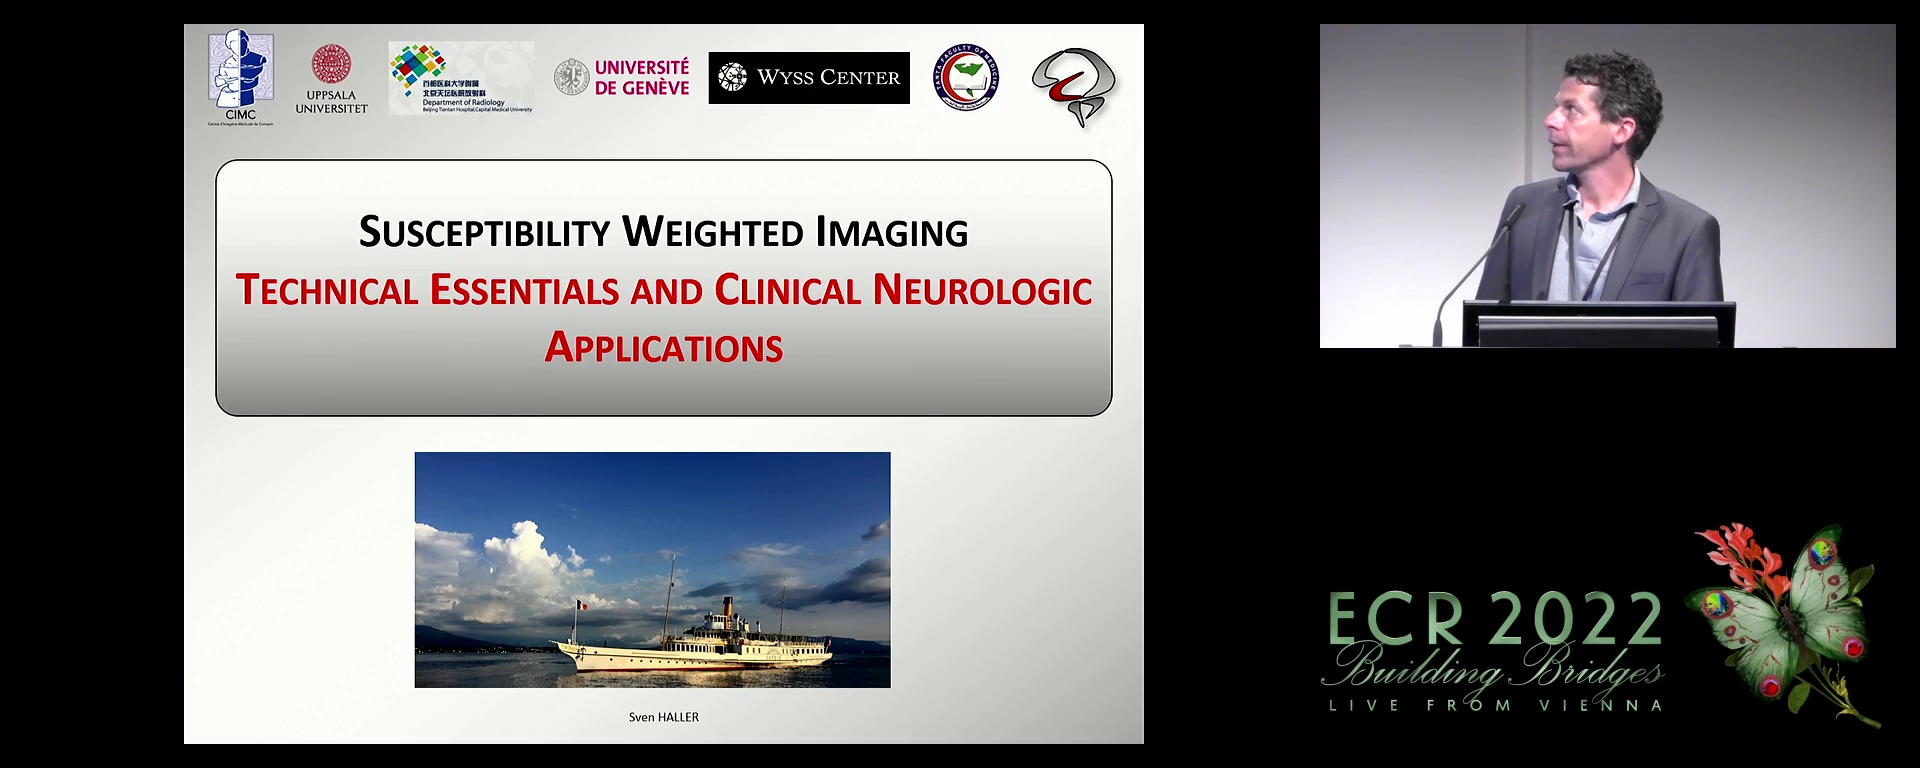 Susceptibility weighted imaging (SWI)